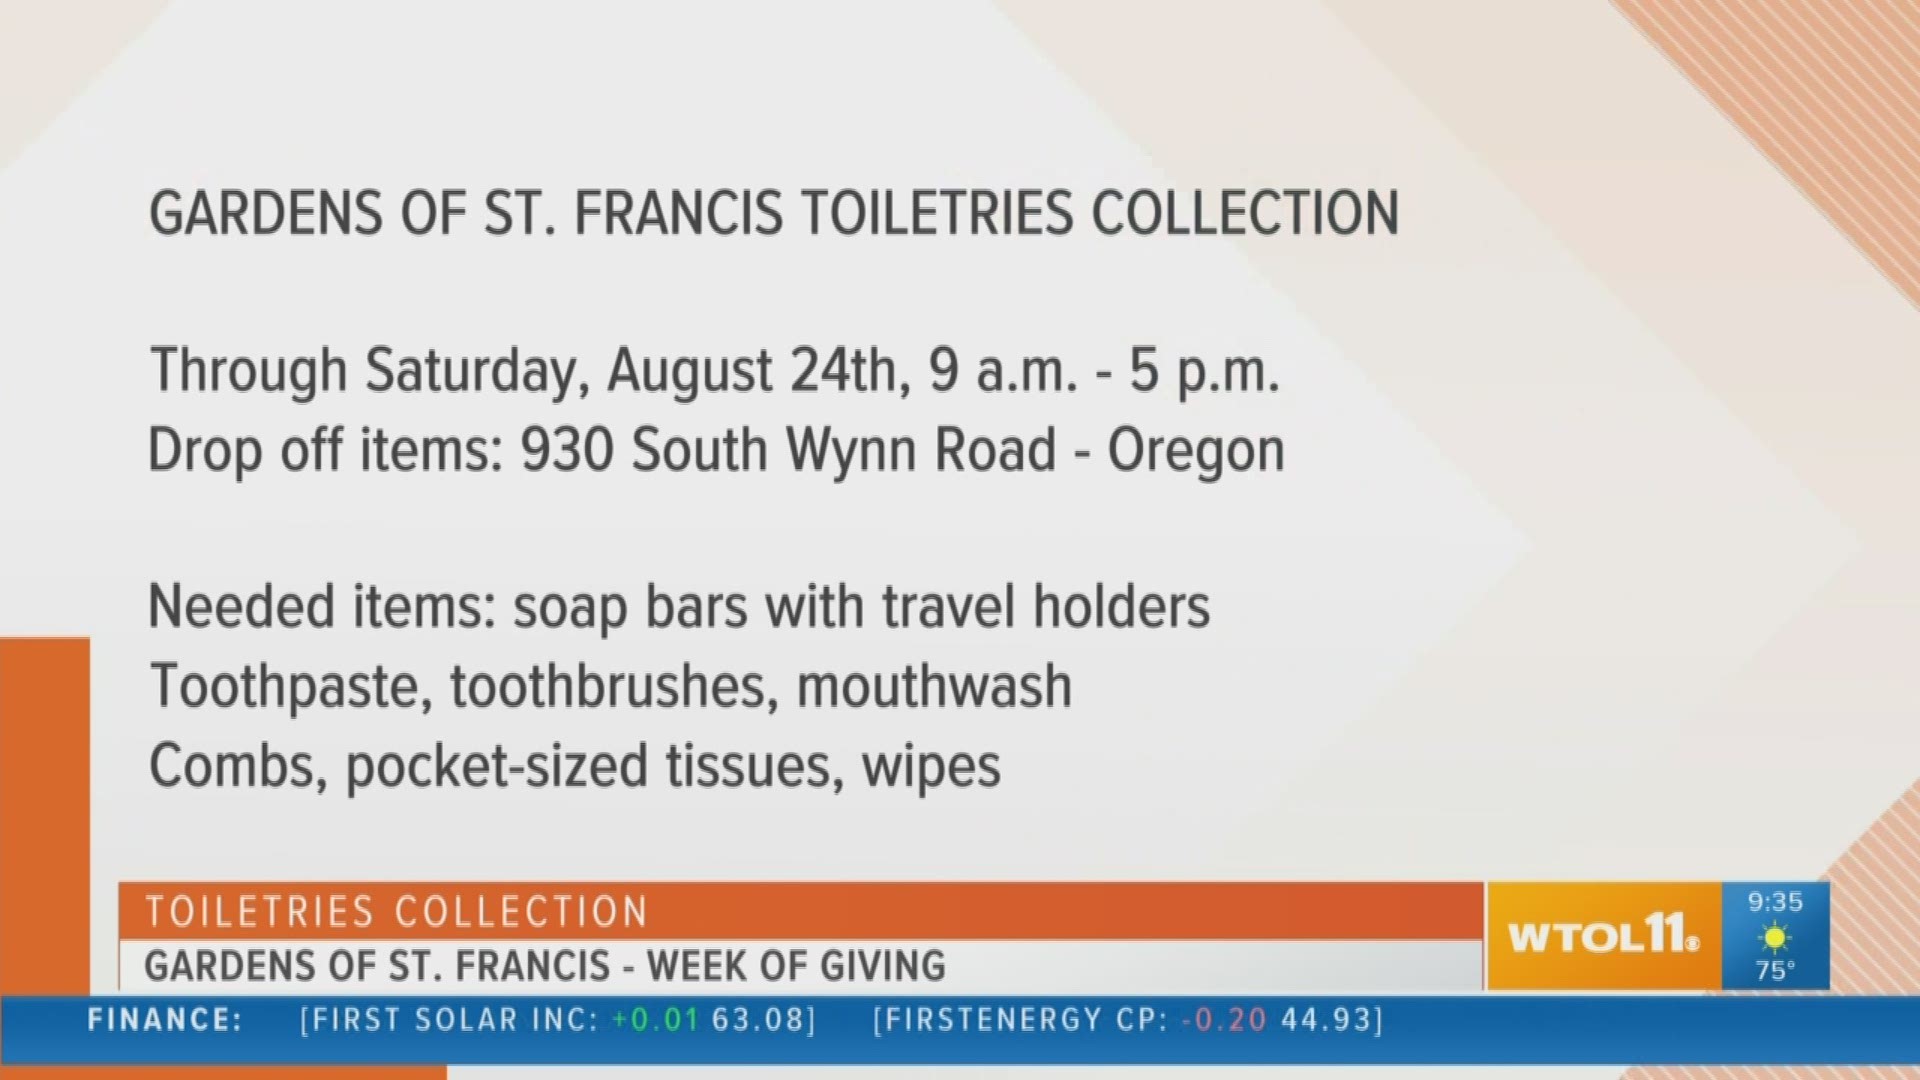 During the Gardens of St. Francis' Week of Giving, consider donating to their toiletries collection.